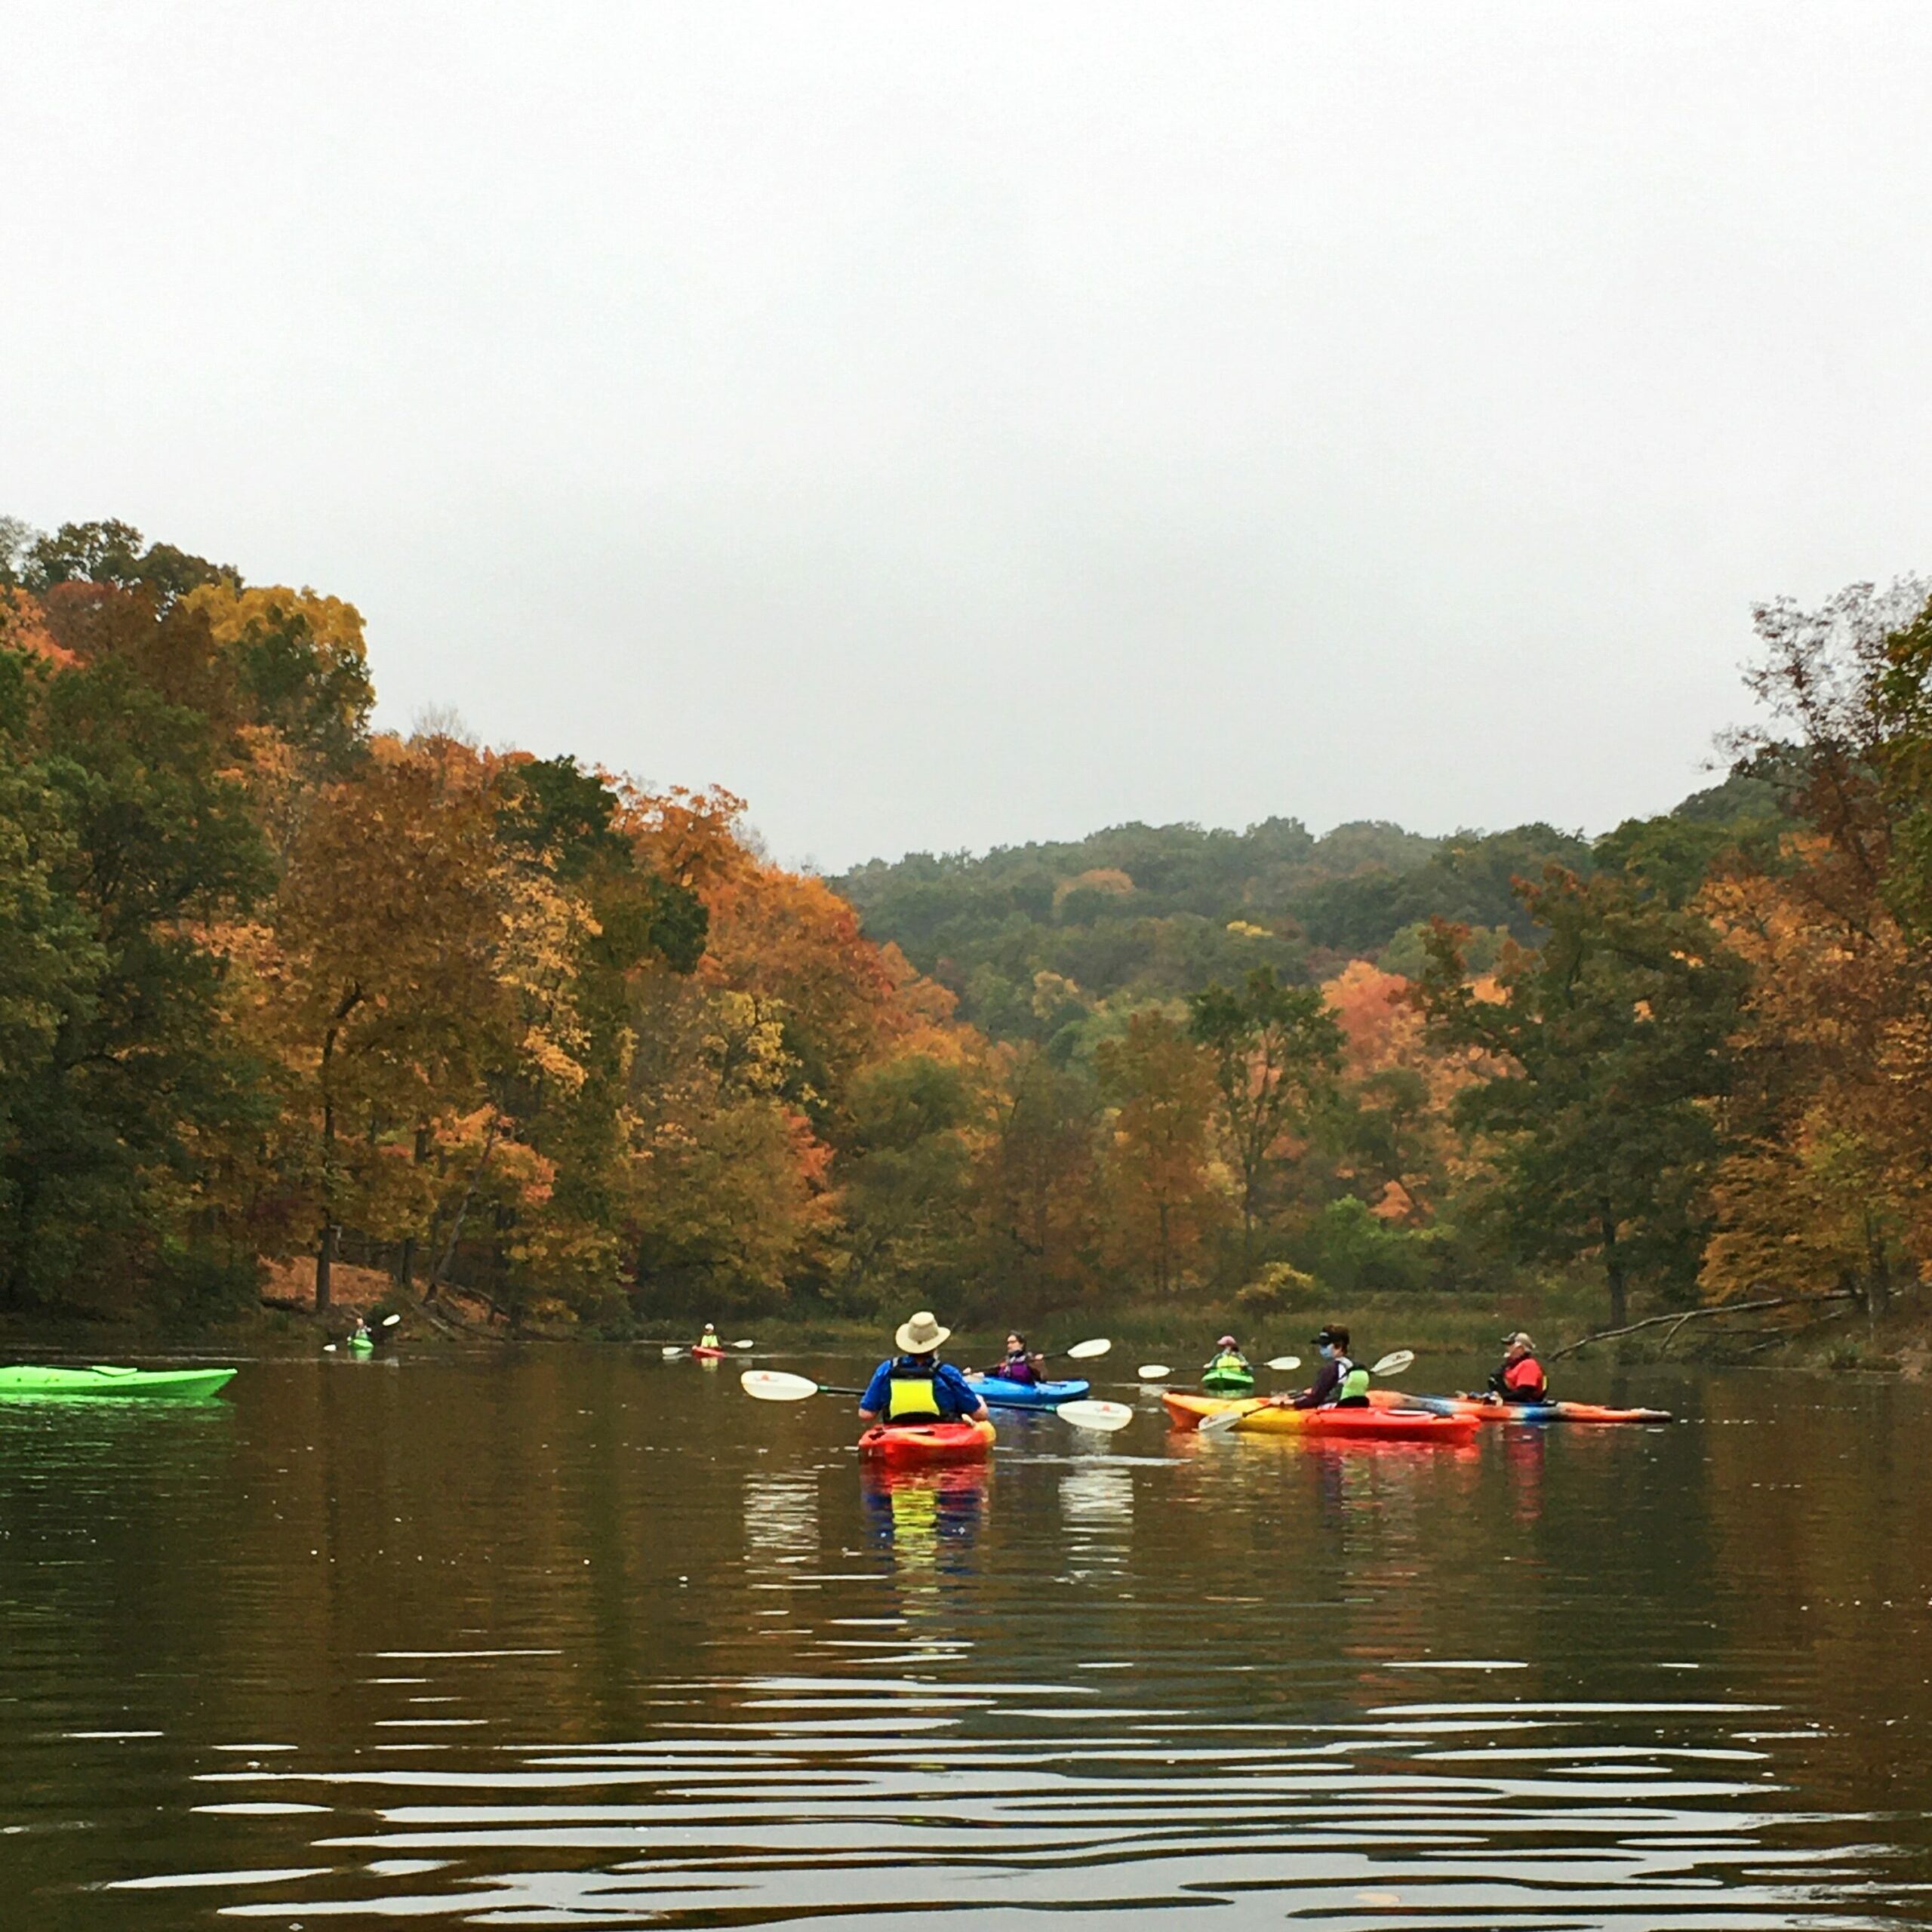 A group of kayakers on a lake